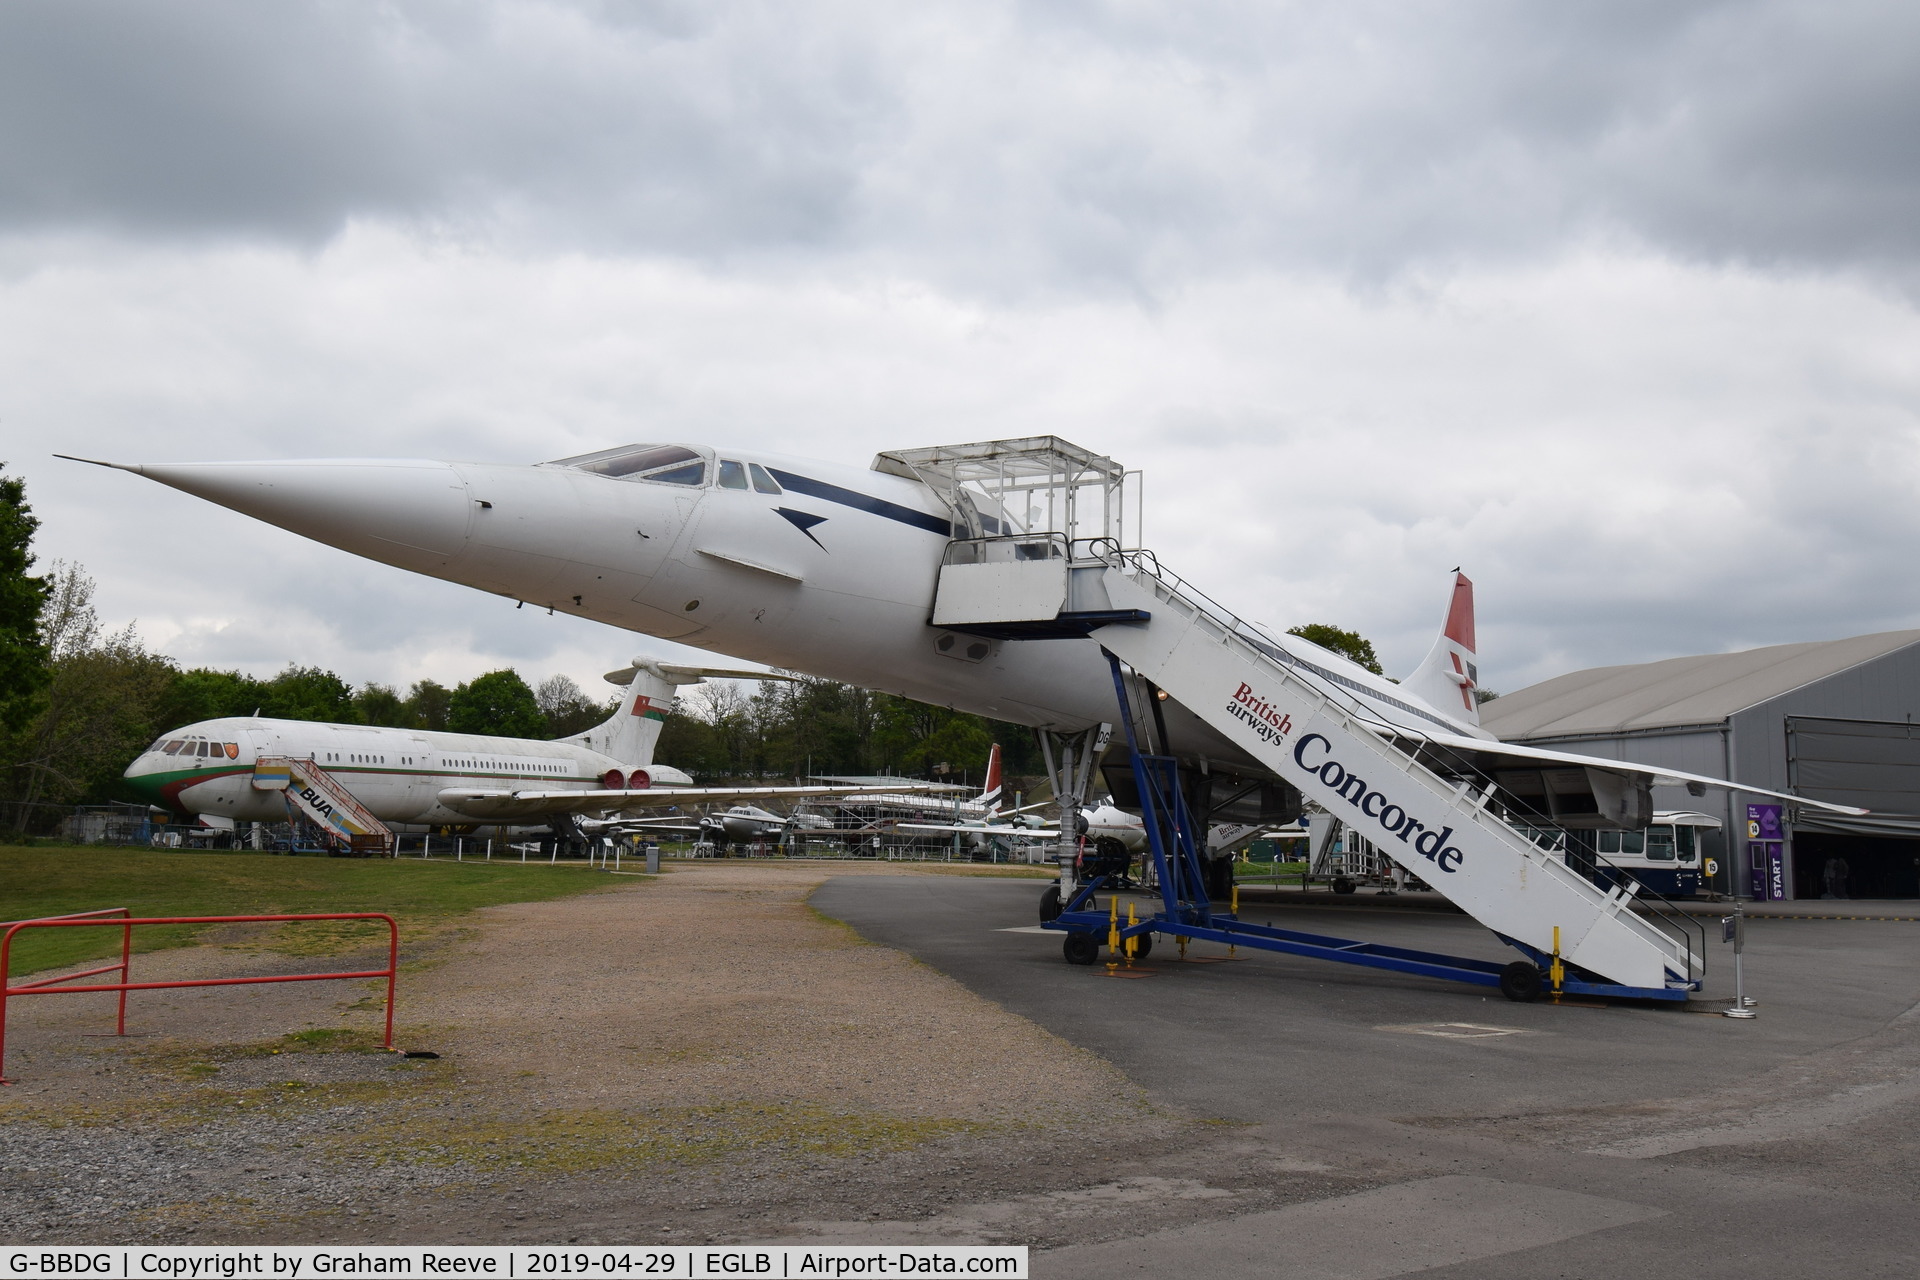 G-BBDG, 1973 BAC Concorde 100 C/N 202, On display at the Brooklands Museum.